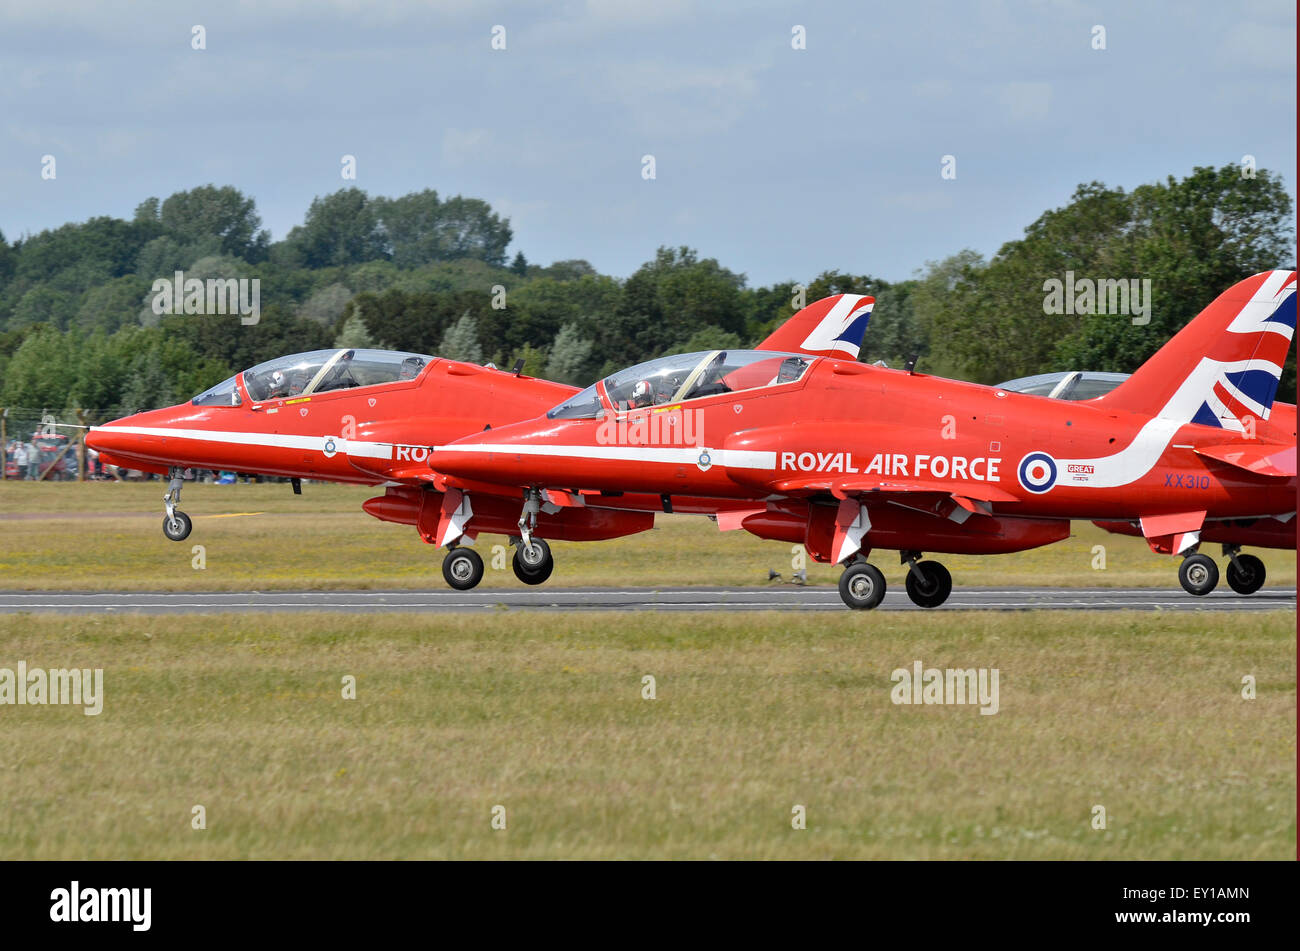 The Red Arrows get airborne for their display at RIAT 2015, Fairford, UK. Credit:  Antony Nettle/Alamy Live News Stock Photo